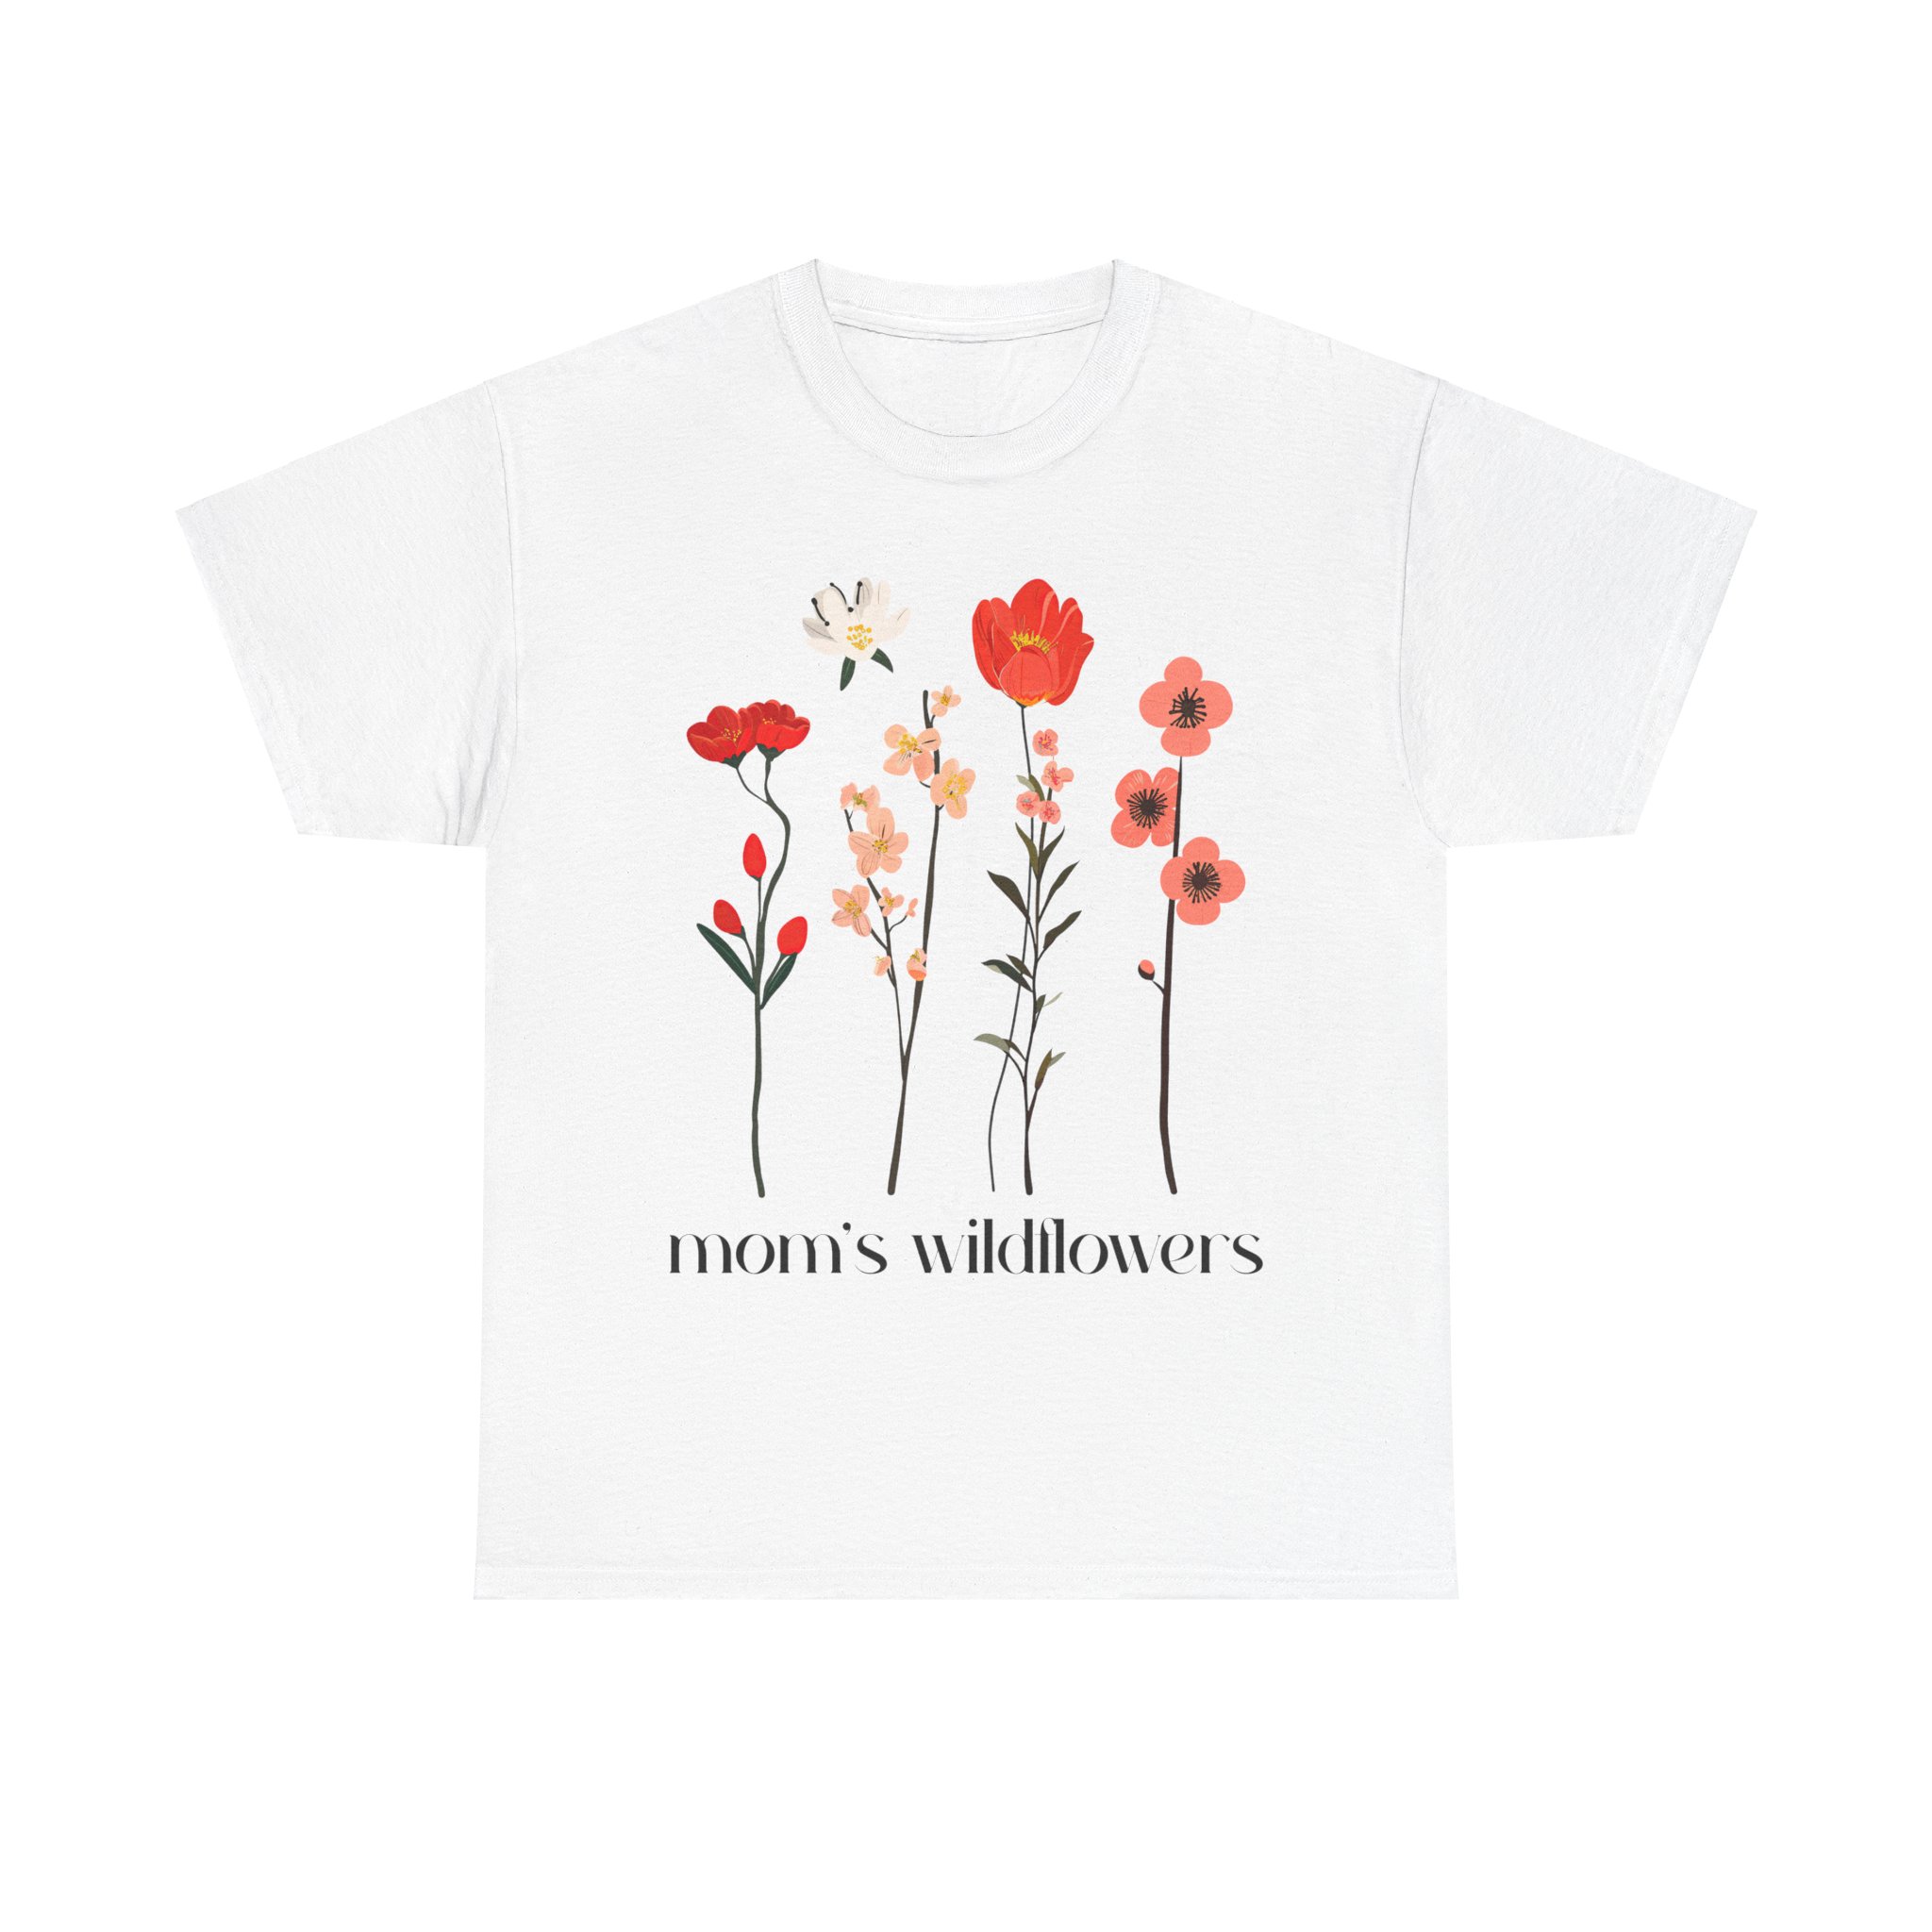 Mother’s Day Birth Month Flower Shirt, Mom Wildflowers Shirt ID-0417 ...